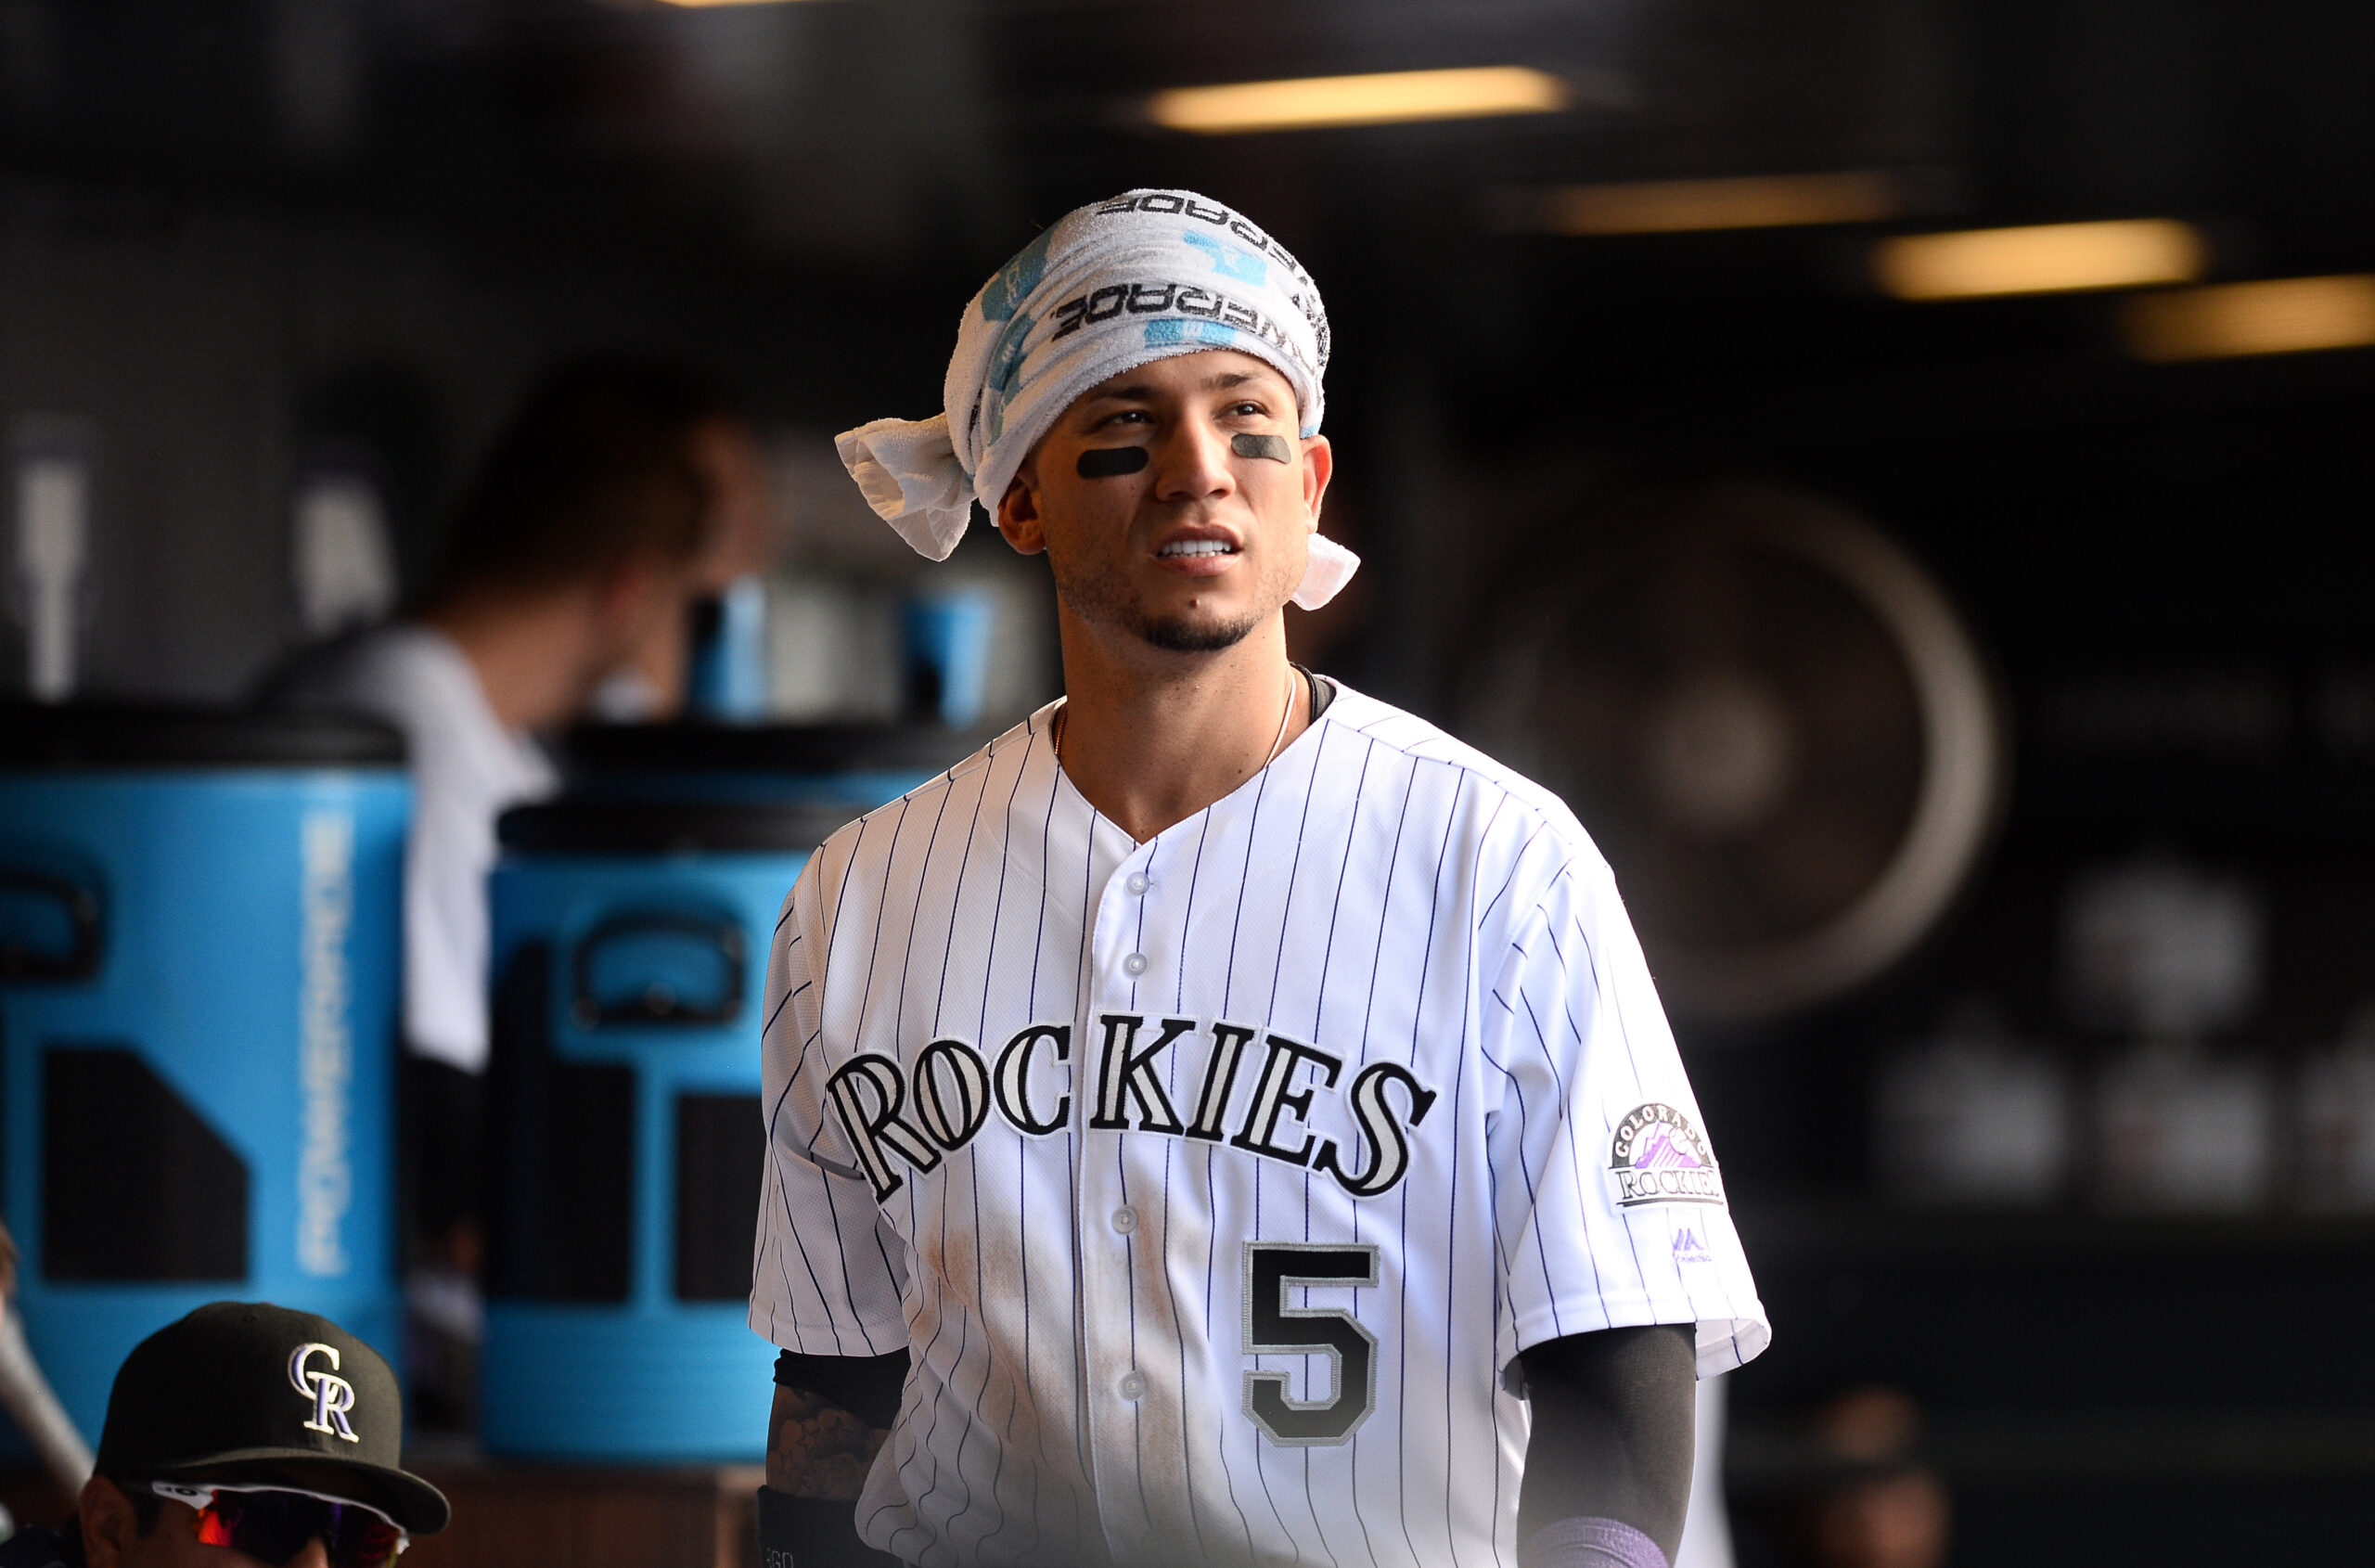 Rockies show how they can win without Troy Tulowitzki